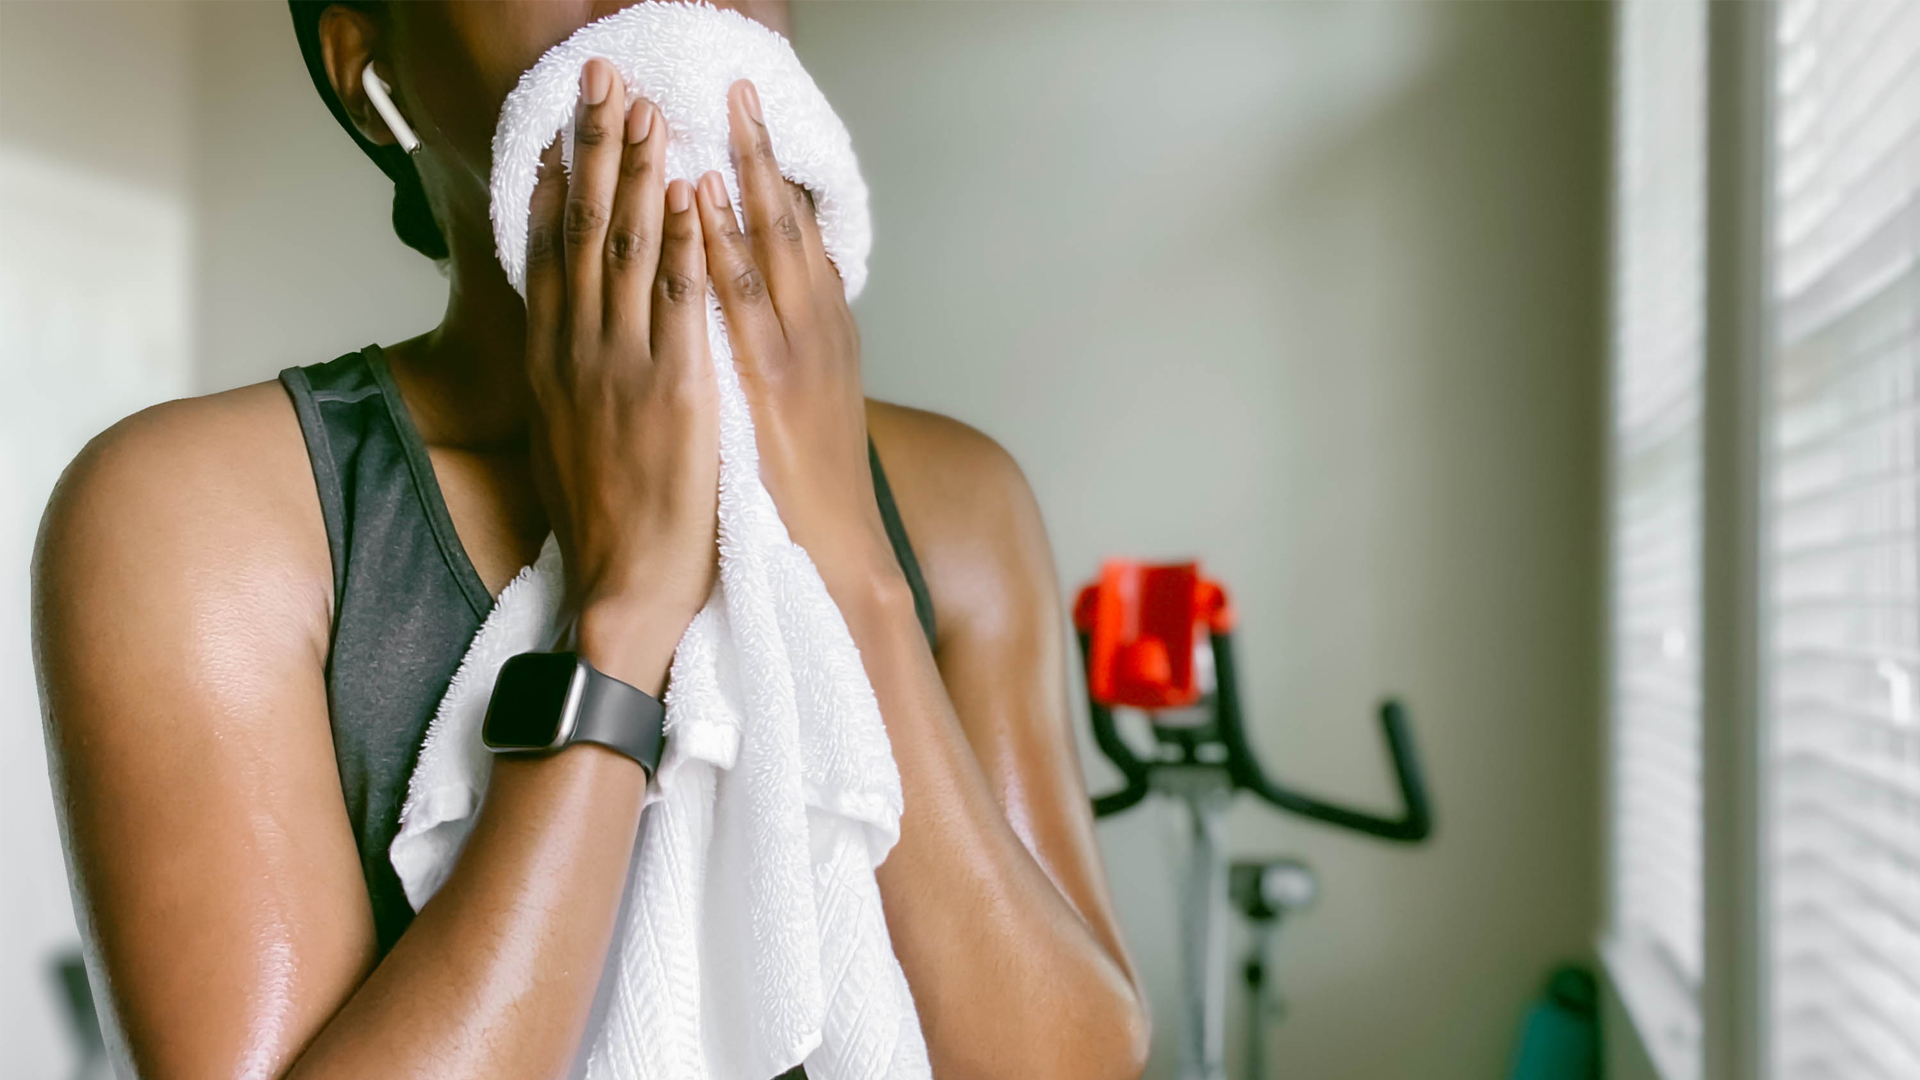 Do exercise bikes burn belly fat? Image of woman using sweat towel after using exercise bike